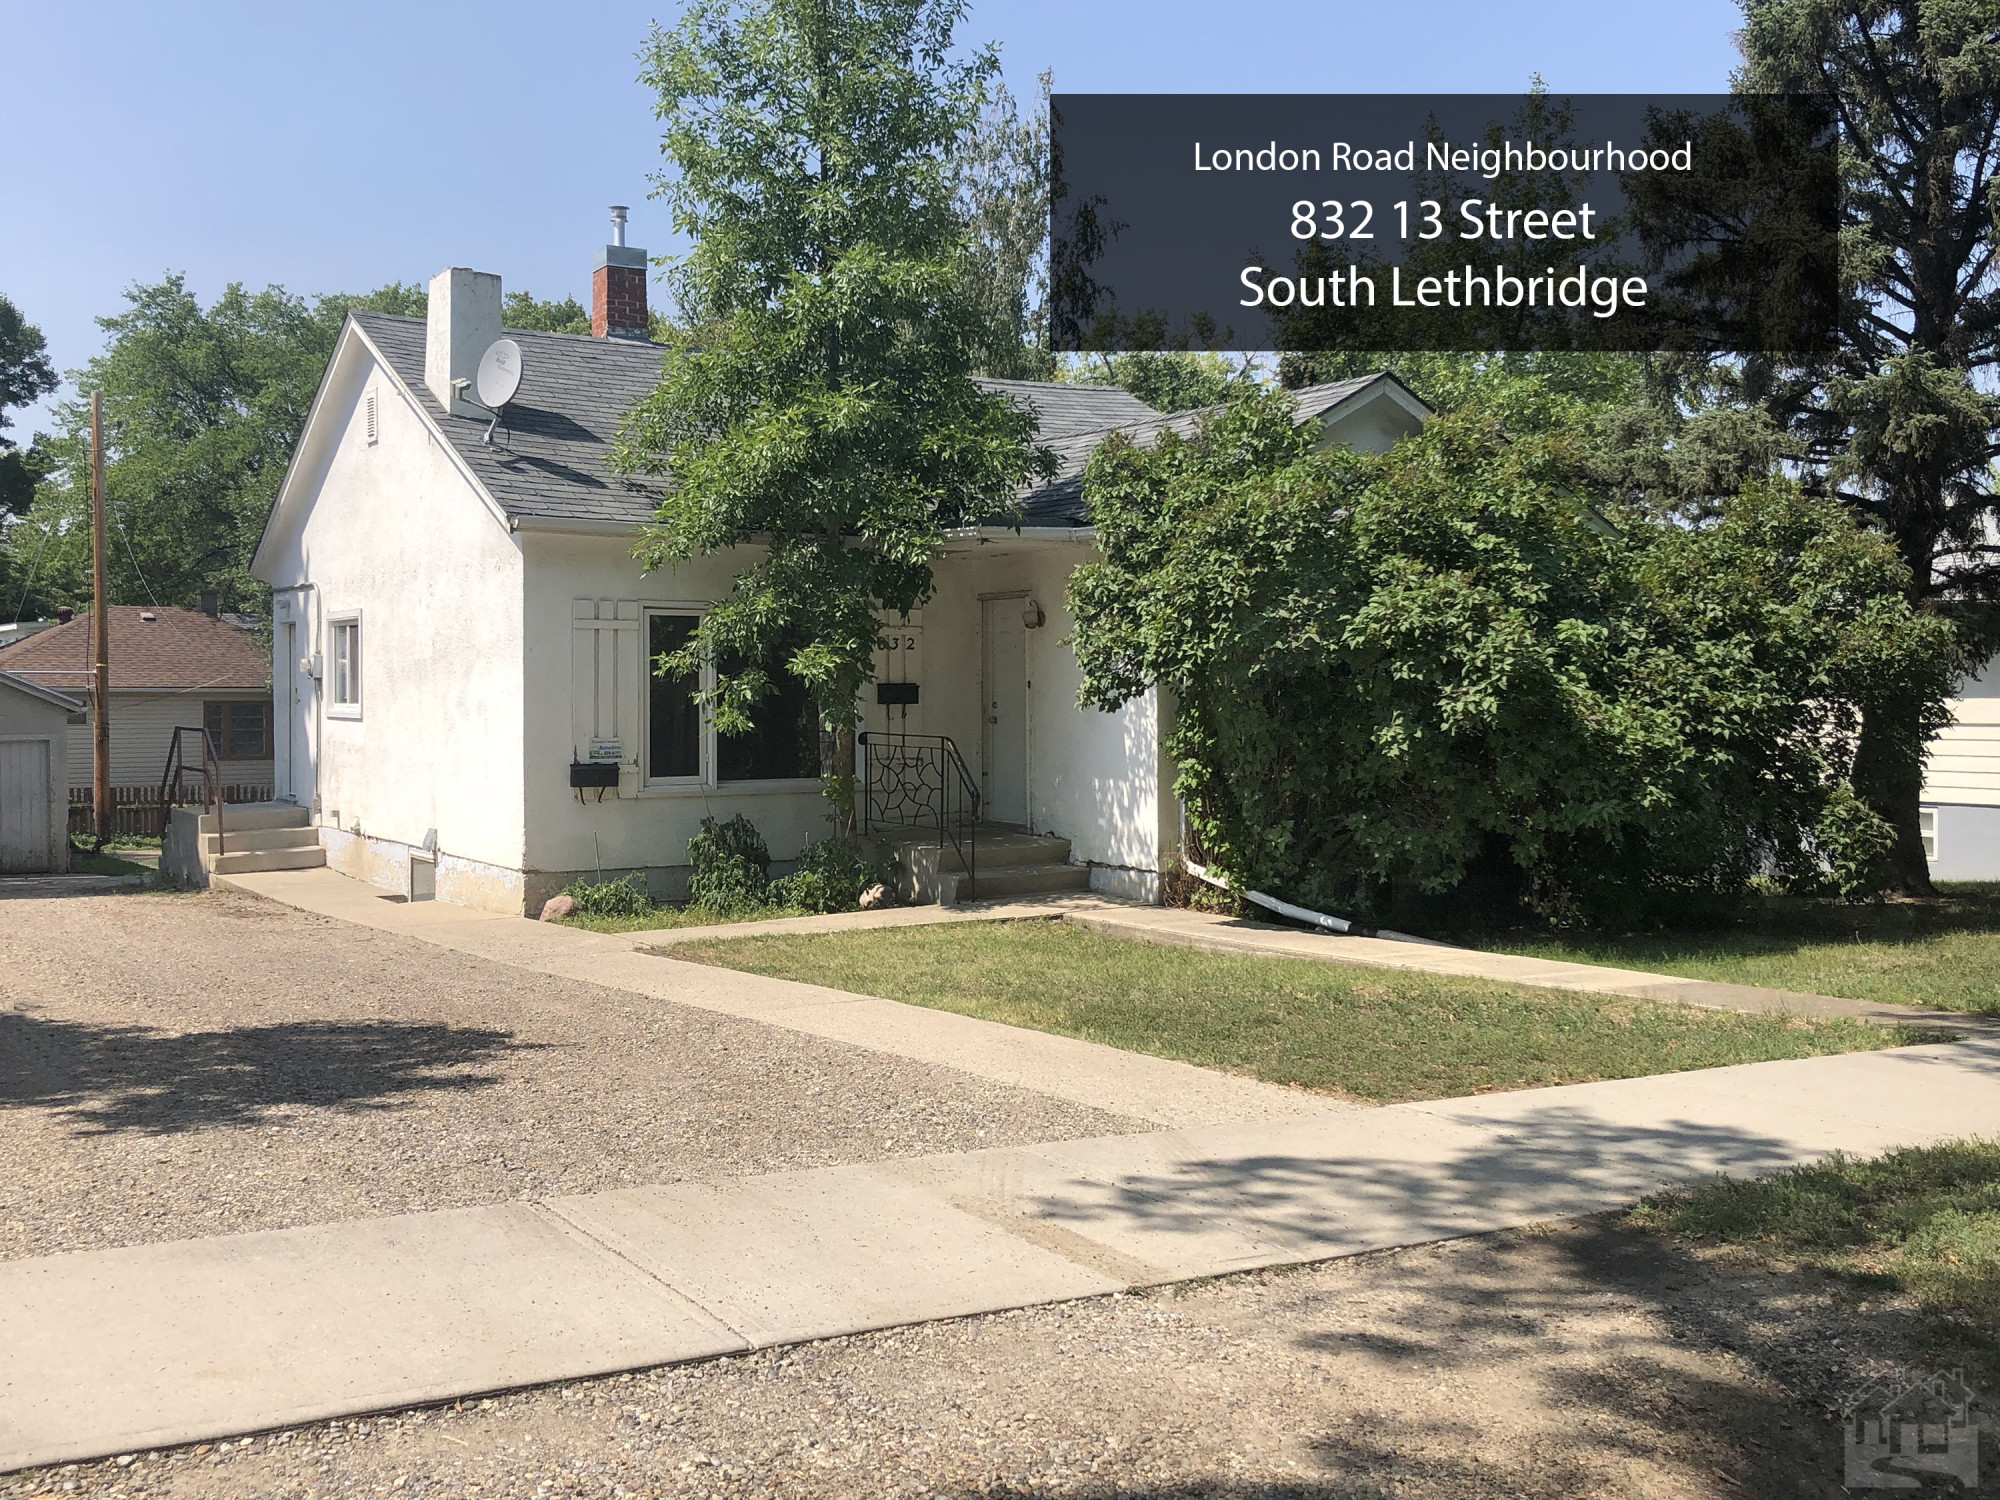 832 13 Street South Lethbridge (Lower Suite) Cover image